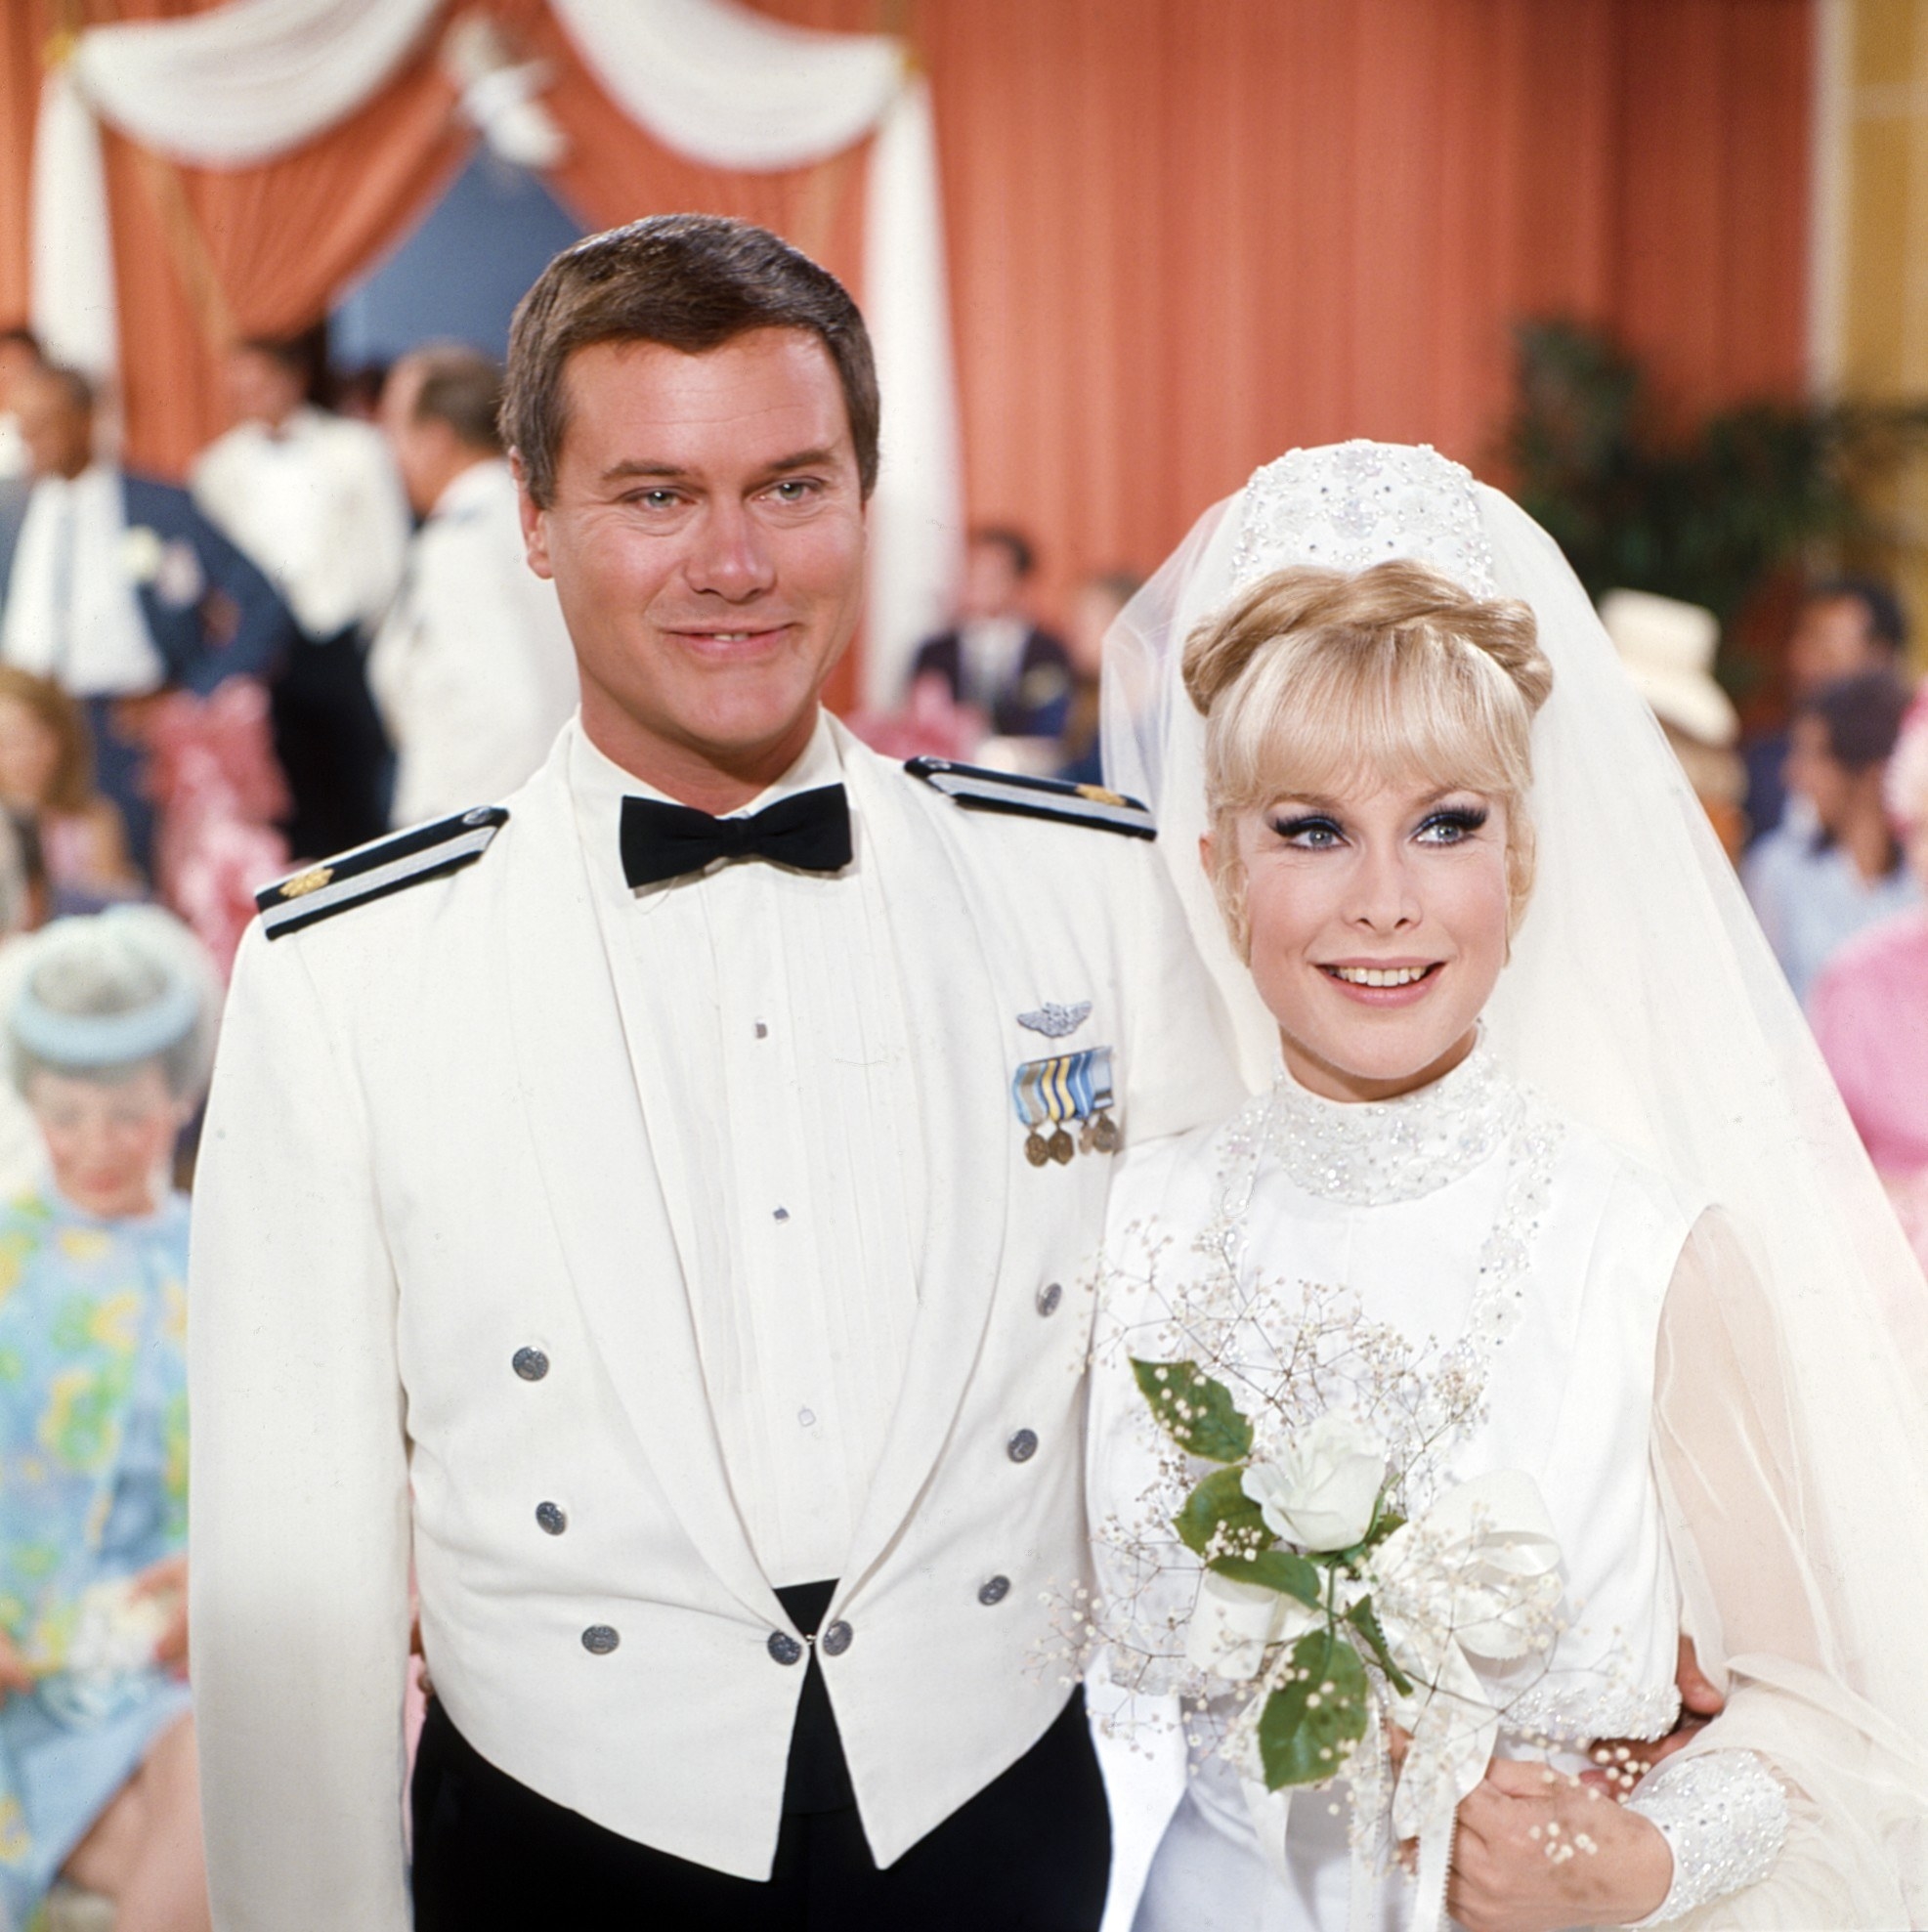 Tony and Jeannie at their wedding